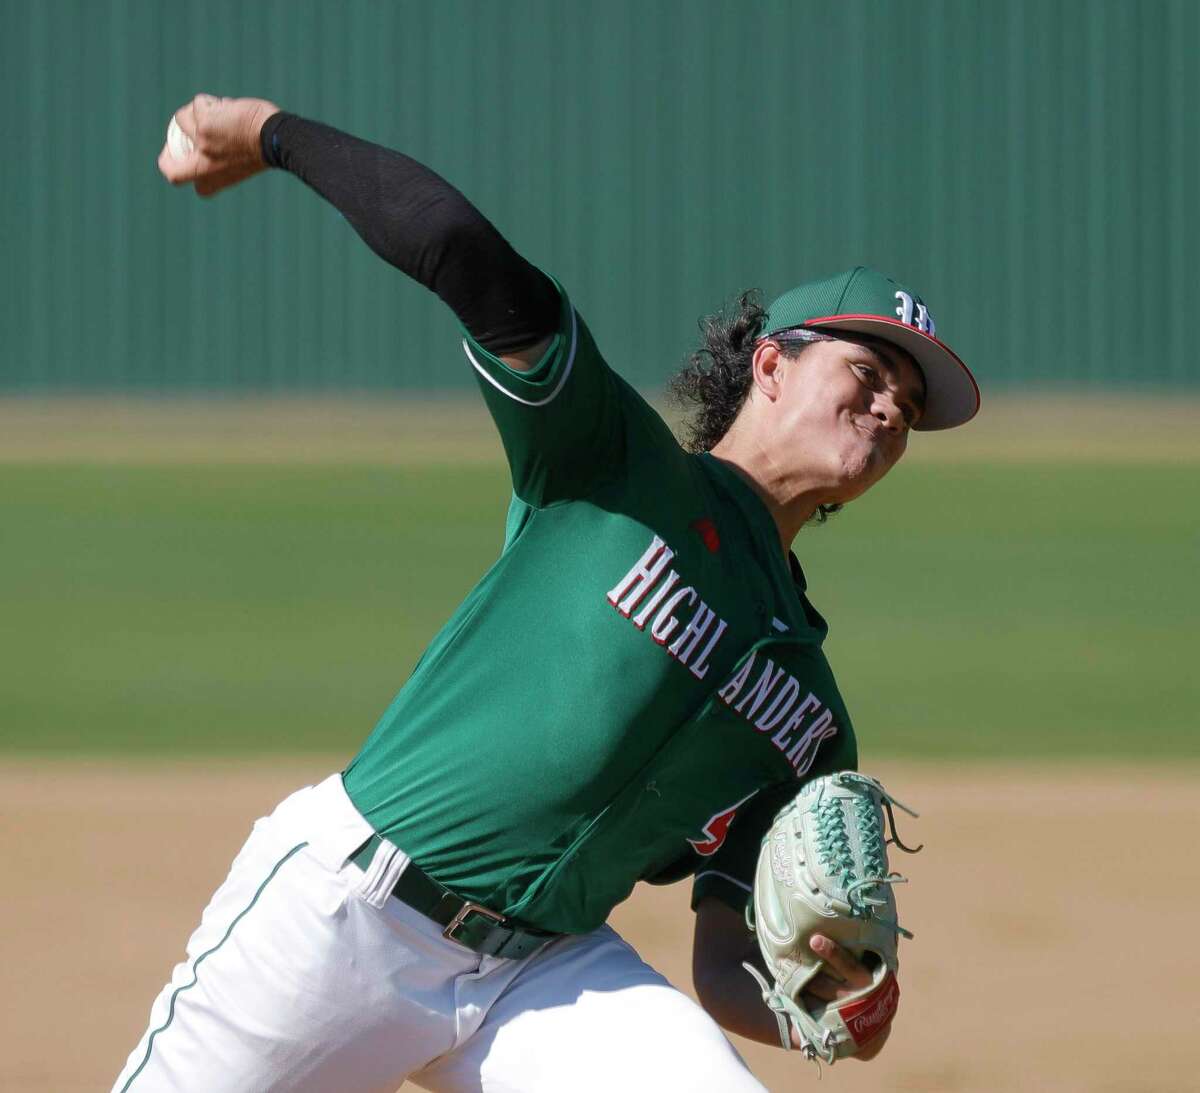 The Woodlands starting pitcher Ethan Coronel (4), shown here earlier this season, took a no decision Thursday but pitched well in the Region II-6A semifinal Game 1 against Rockwall.